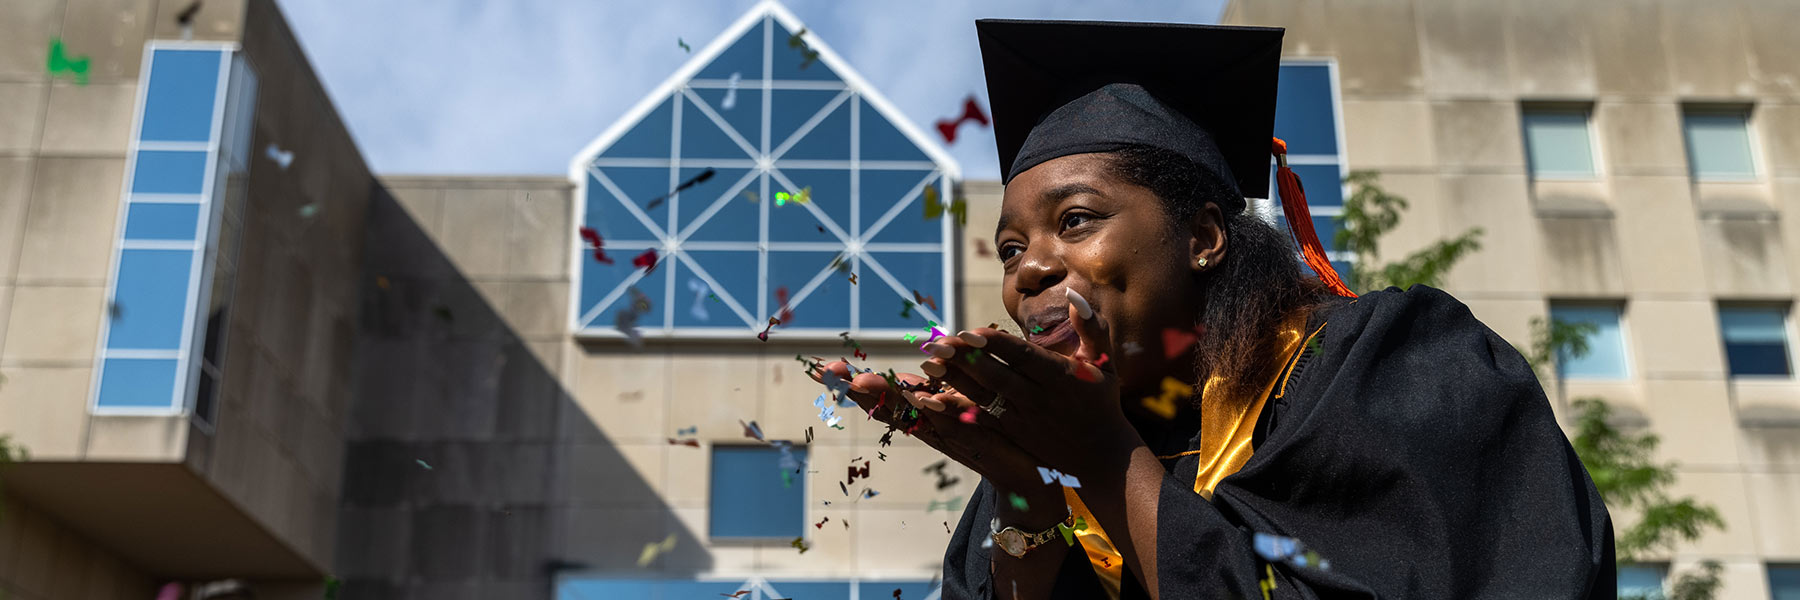 A graduate blows confetti from her cupped hands with the IUPUI University Library behind her.